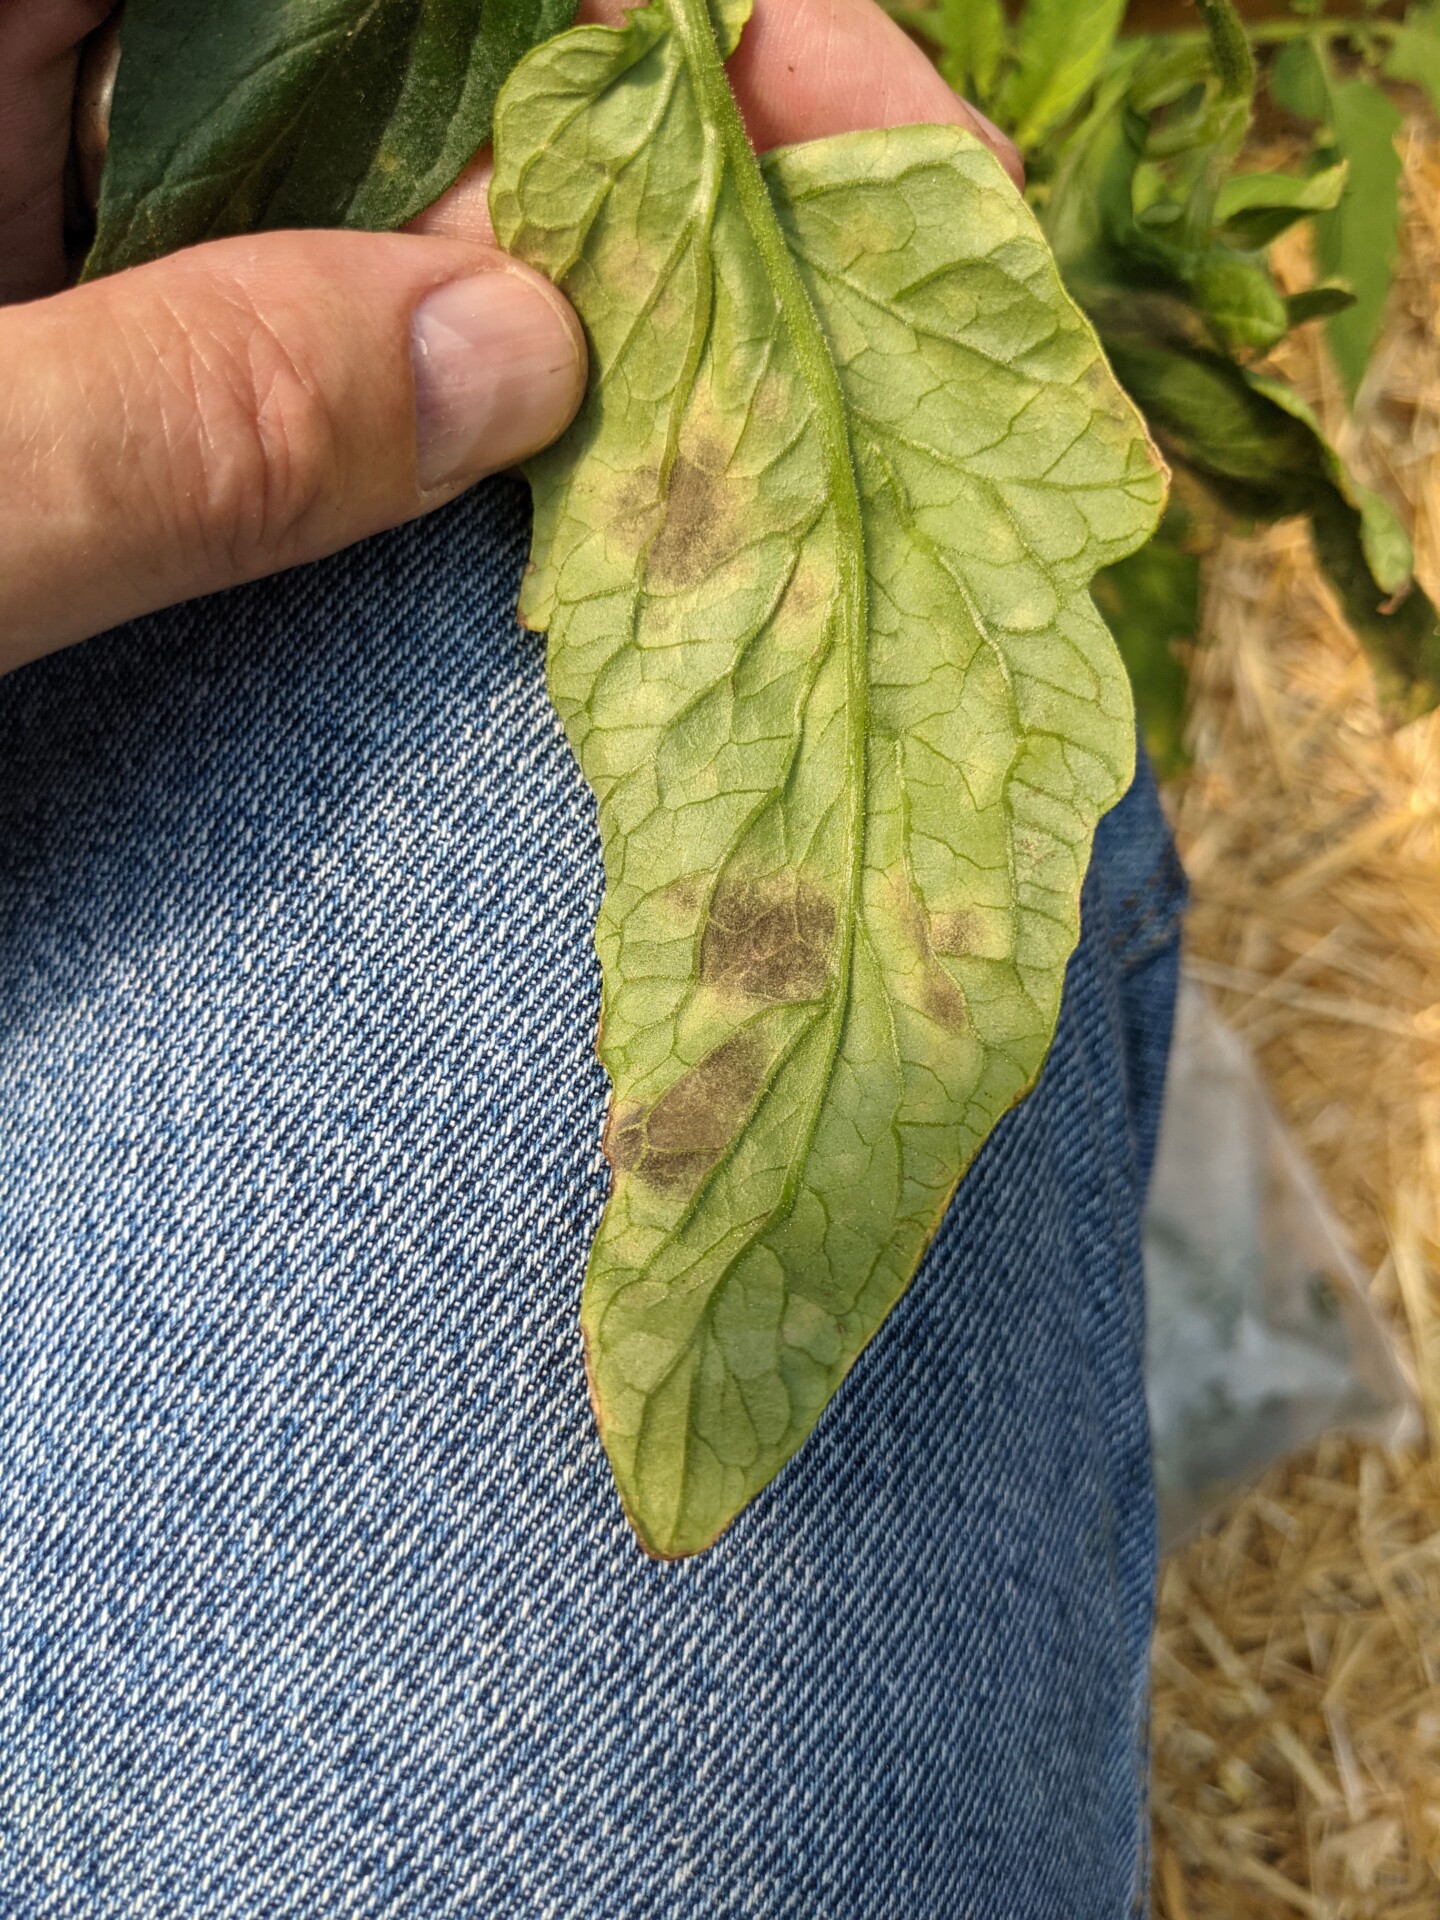 Another view of the dark sporulation of Cercospora leaf mold of tomato.